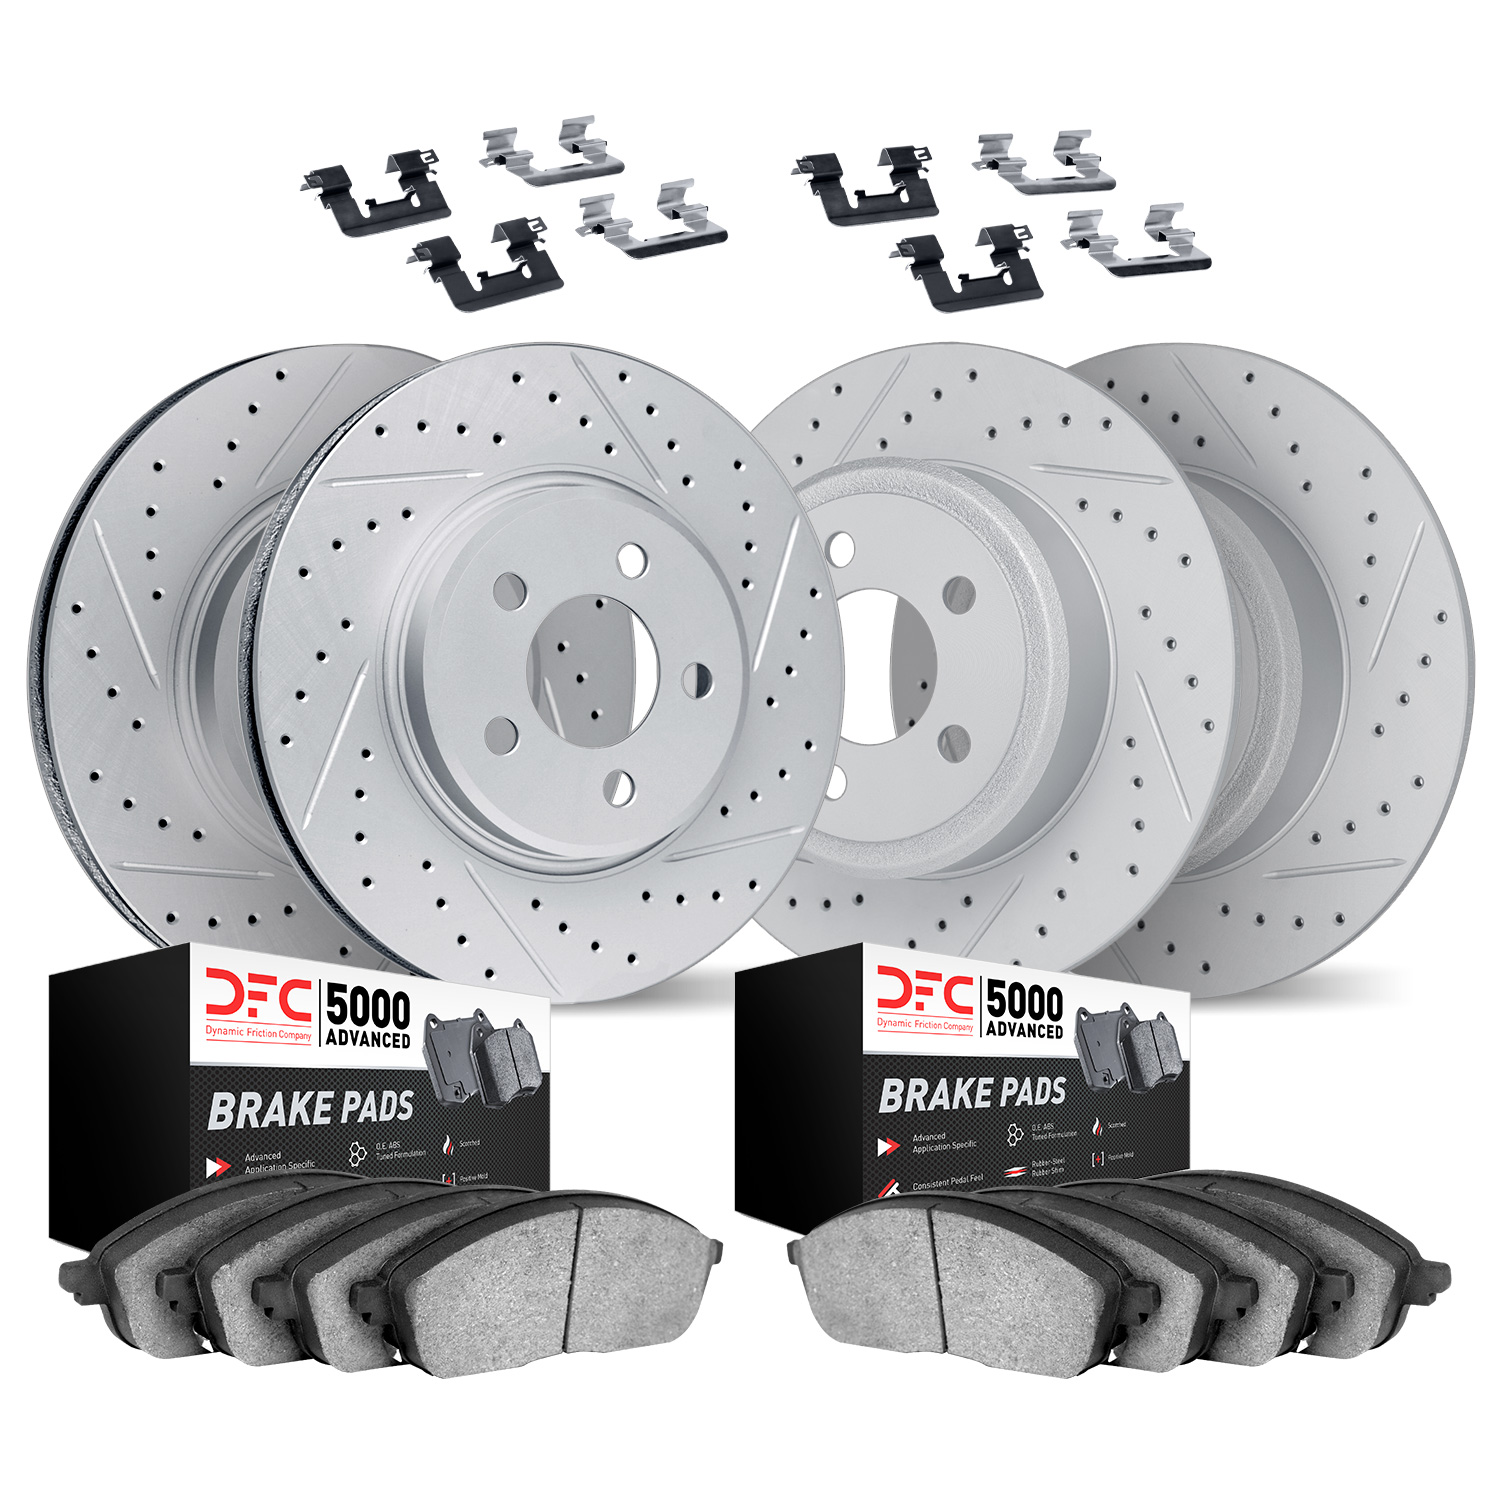 2514-31000 Geoperformance Drilled/Slotted Rotors w/5000 Advanced Brake Pads Kit & Hardware, 1995-2001 BMW, Position: Front and R